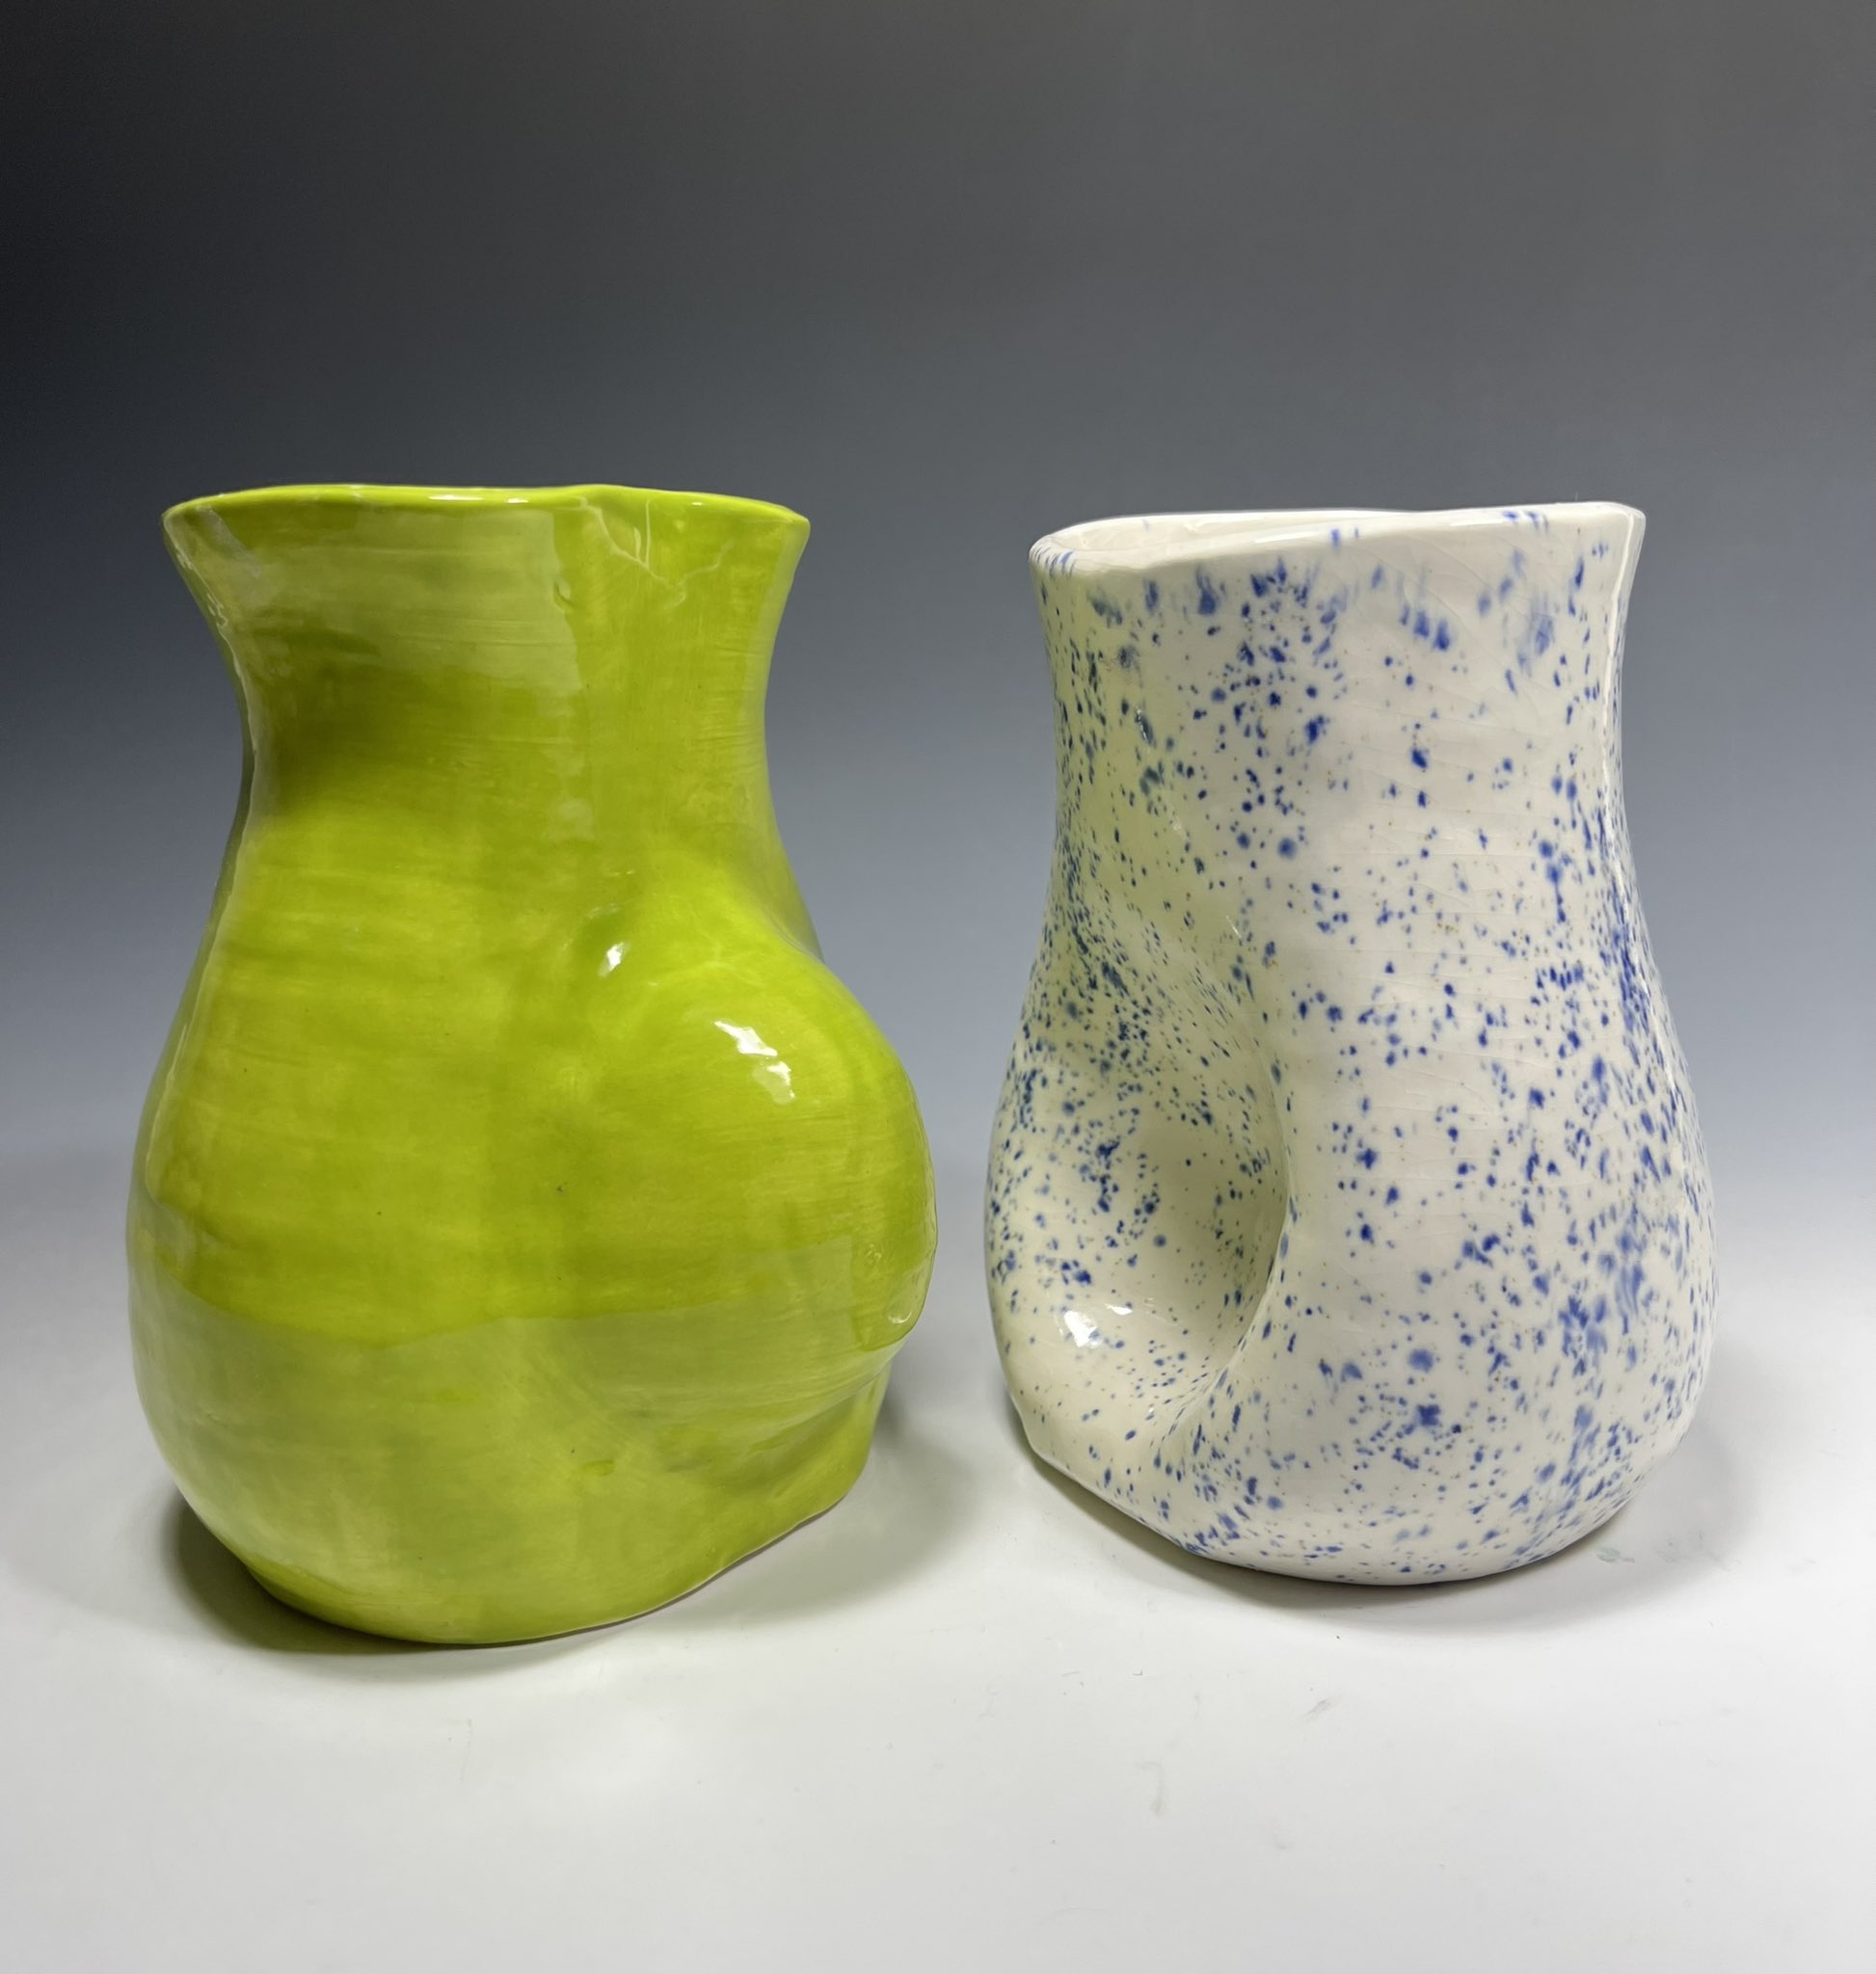 A set of avocado inspired vases will be for sale at the Empty Bowls Silent Auction